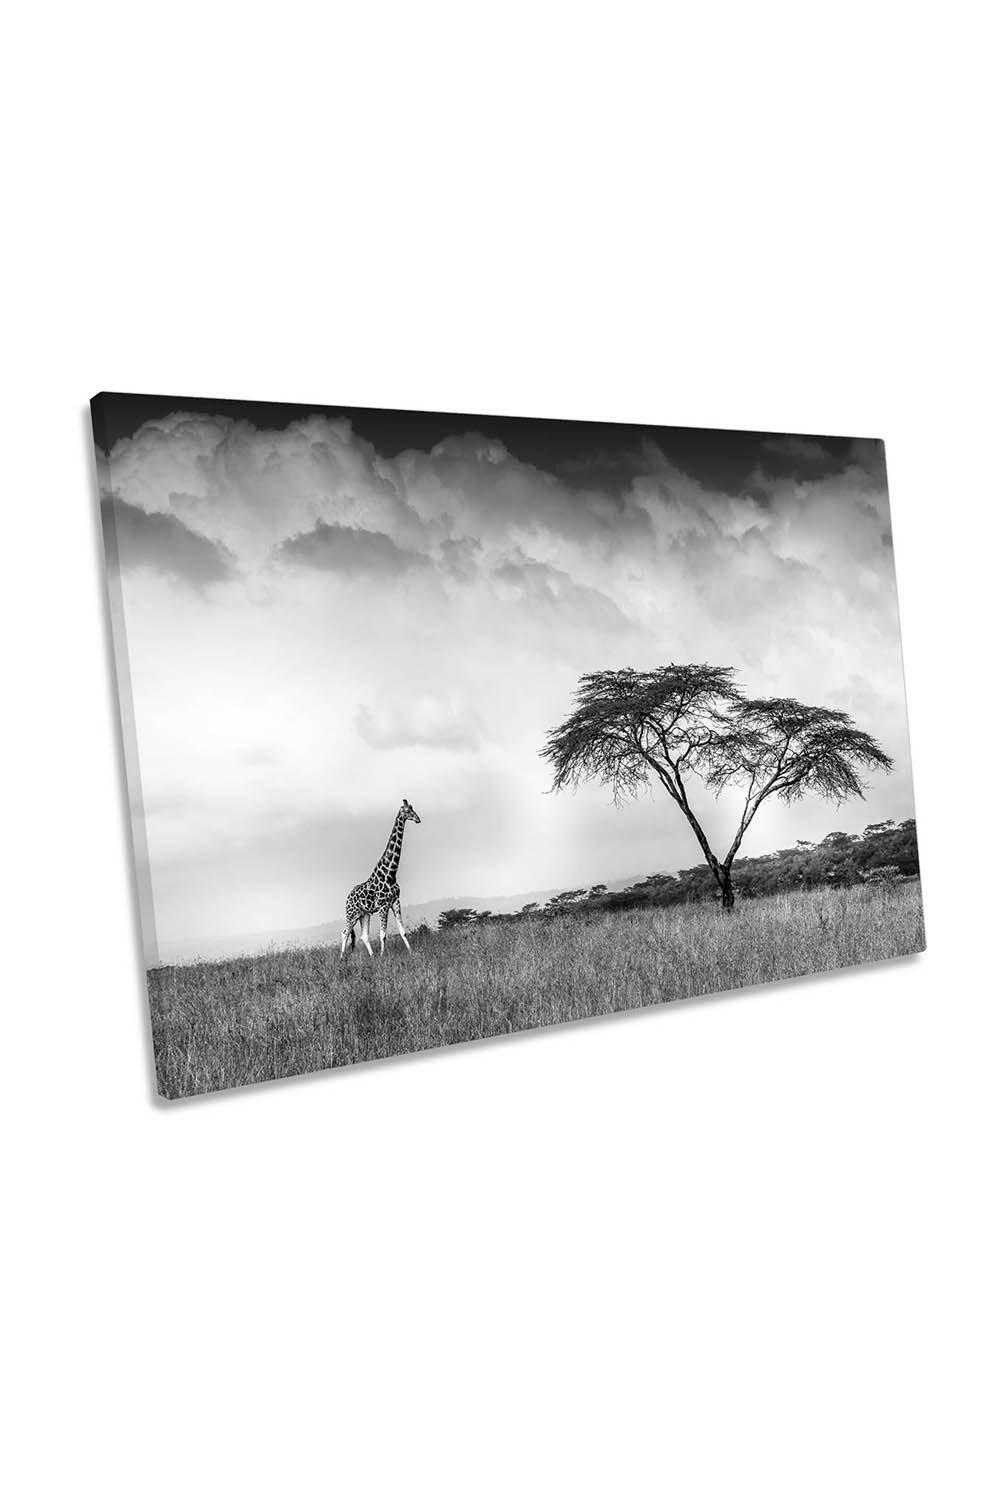 And I Dreamed of Africa Giraffe Canvas Wall Art Picture Print